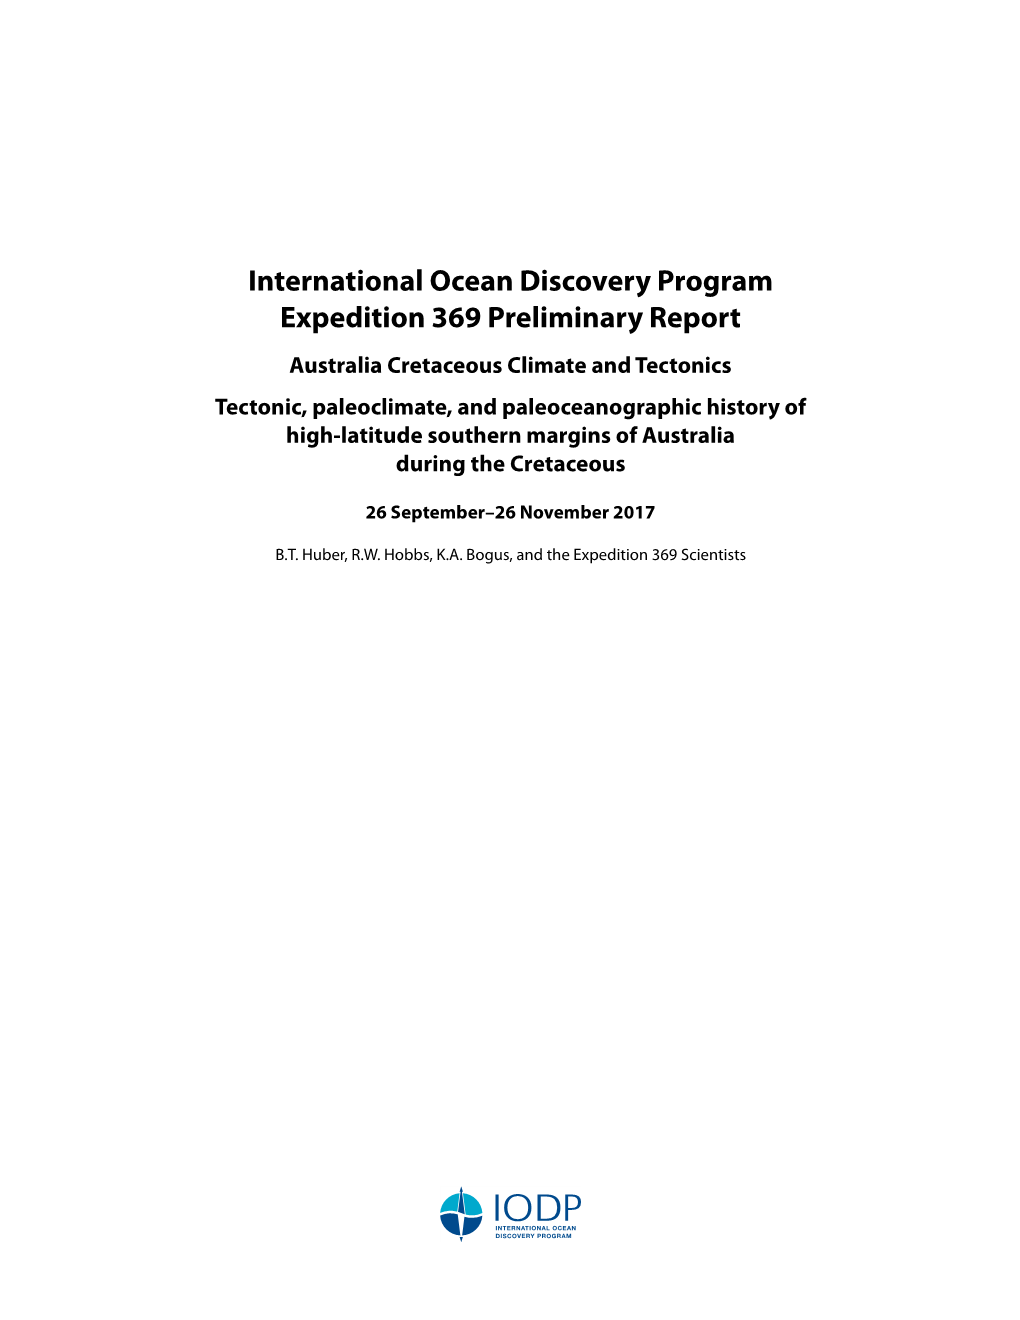 International Ocean Discovery Program Expedition 369 Preliminary Report